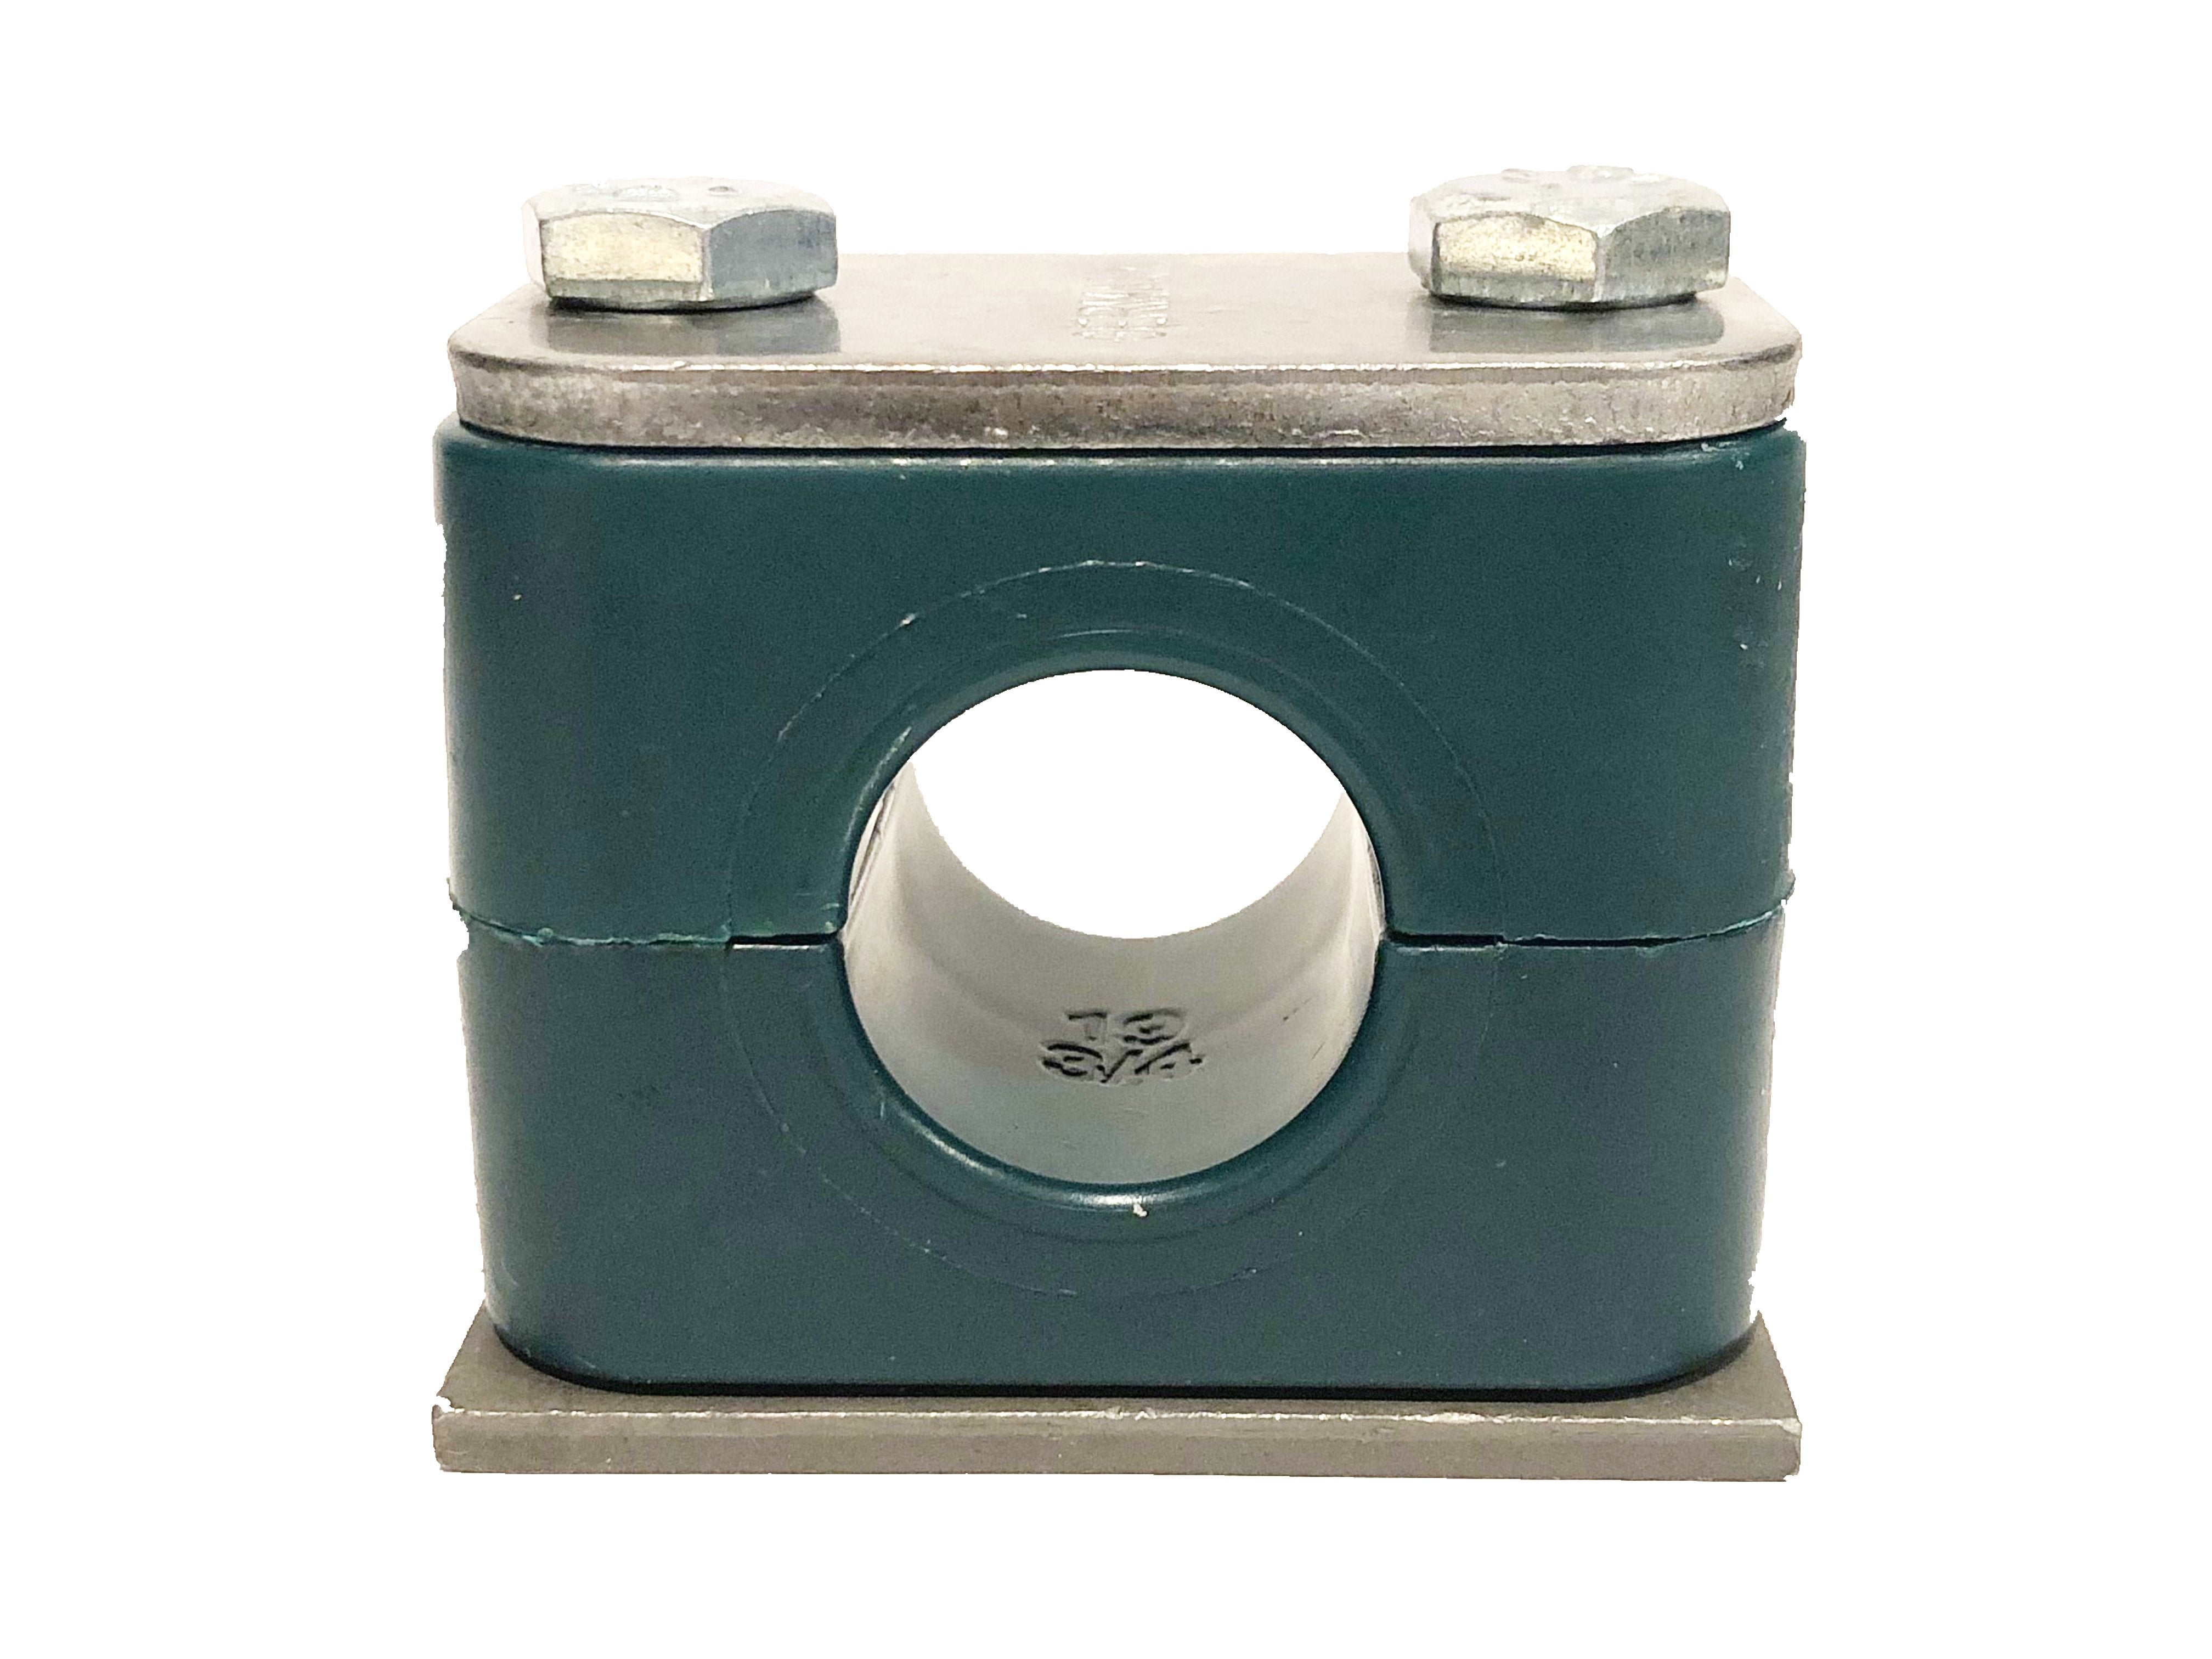 SP-760.3-PP-H-DP-AS-U-W5 : Stauff Clamp, Single Weld Plate, 2.37" (60.3mm) OD, for 2" Pipe, Green PP Insert, Smooth Interior, 316SS